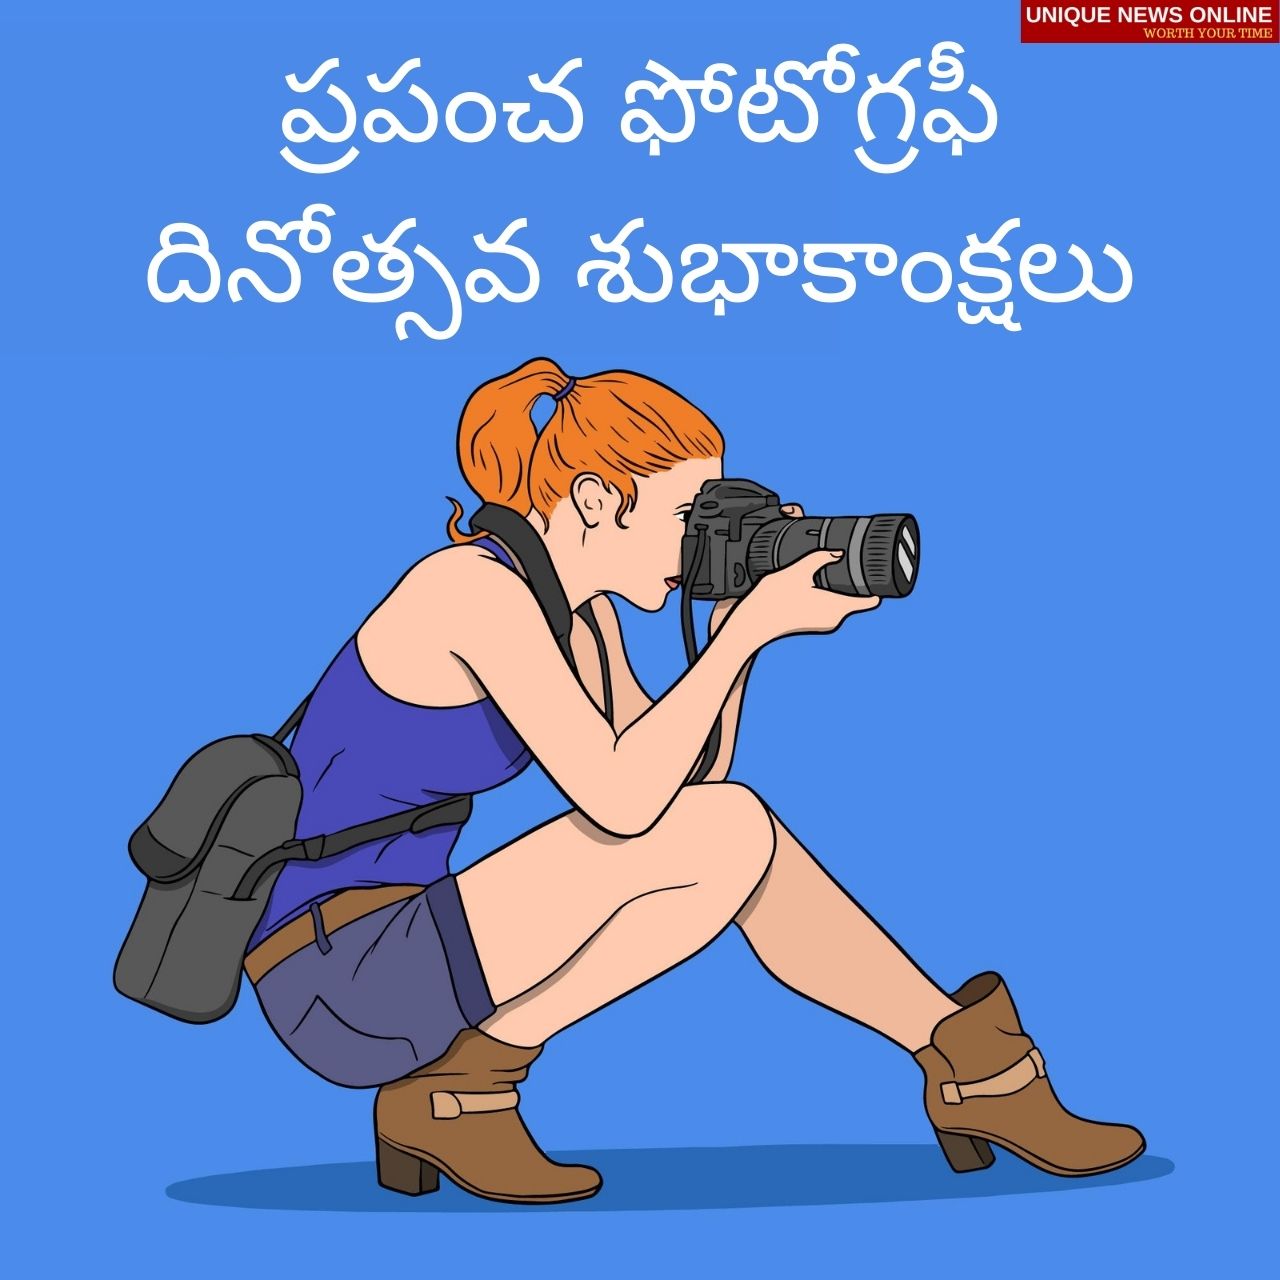 World Photography Day 2021 Telugu Messages, Greetings, Quotes, Shayari, Wishes, and HD Images for Photographers